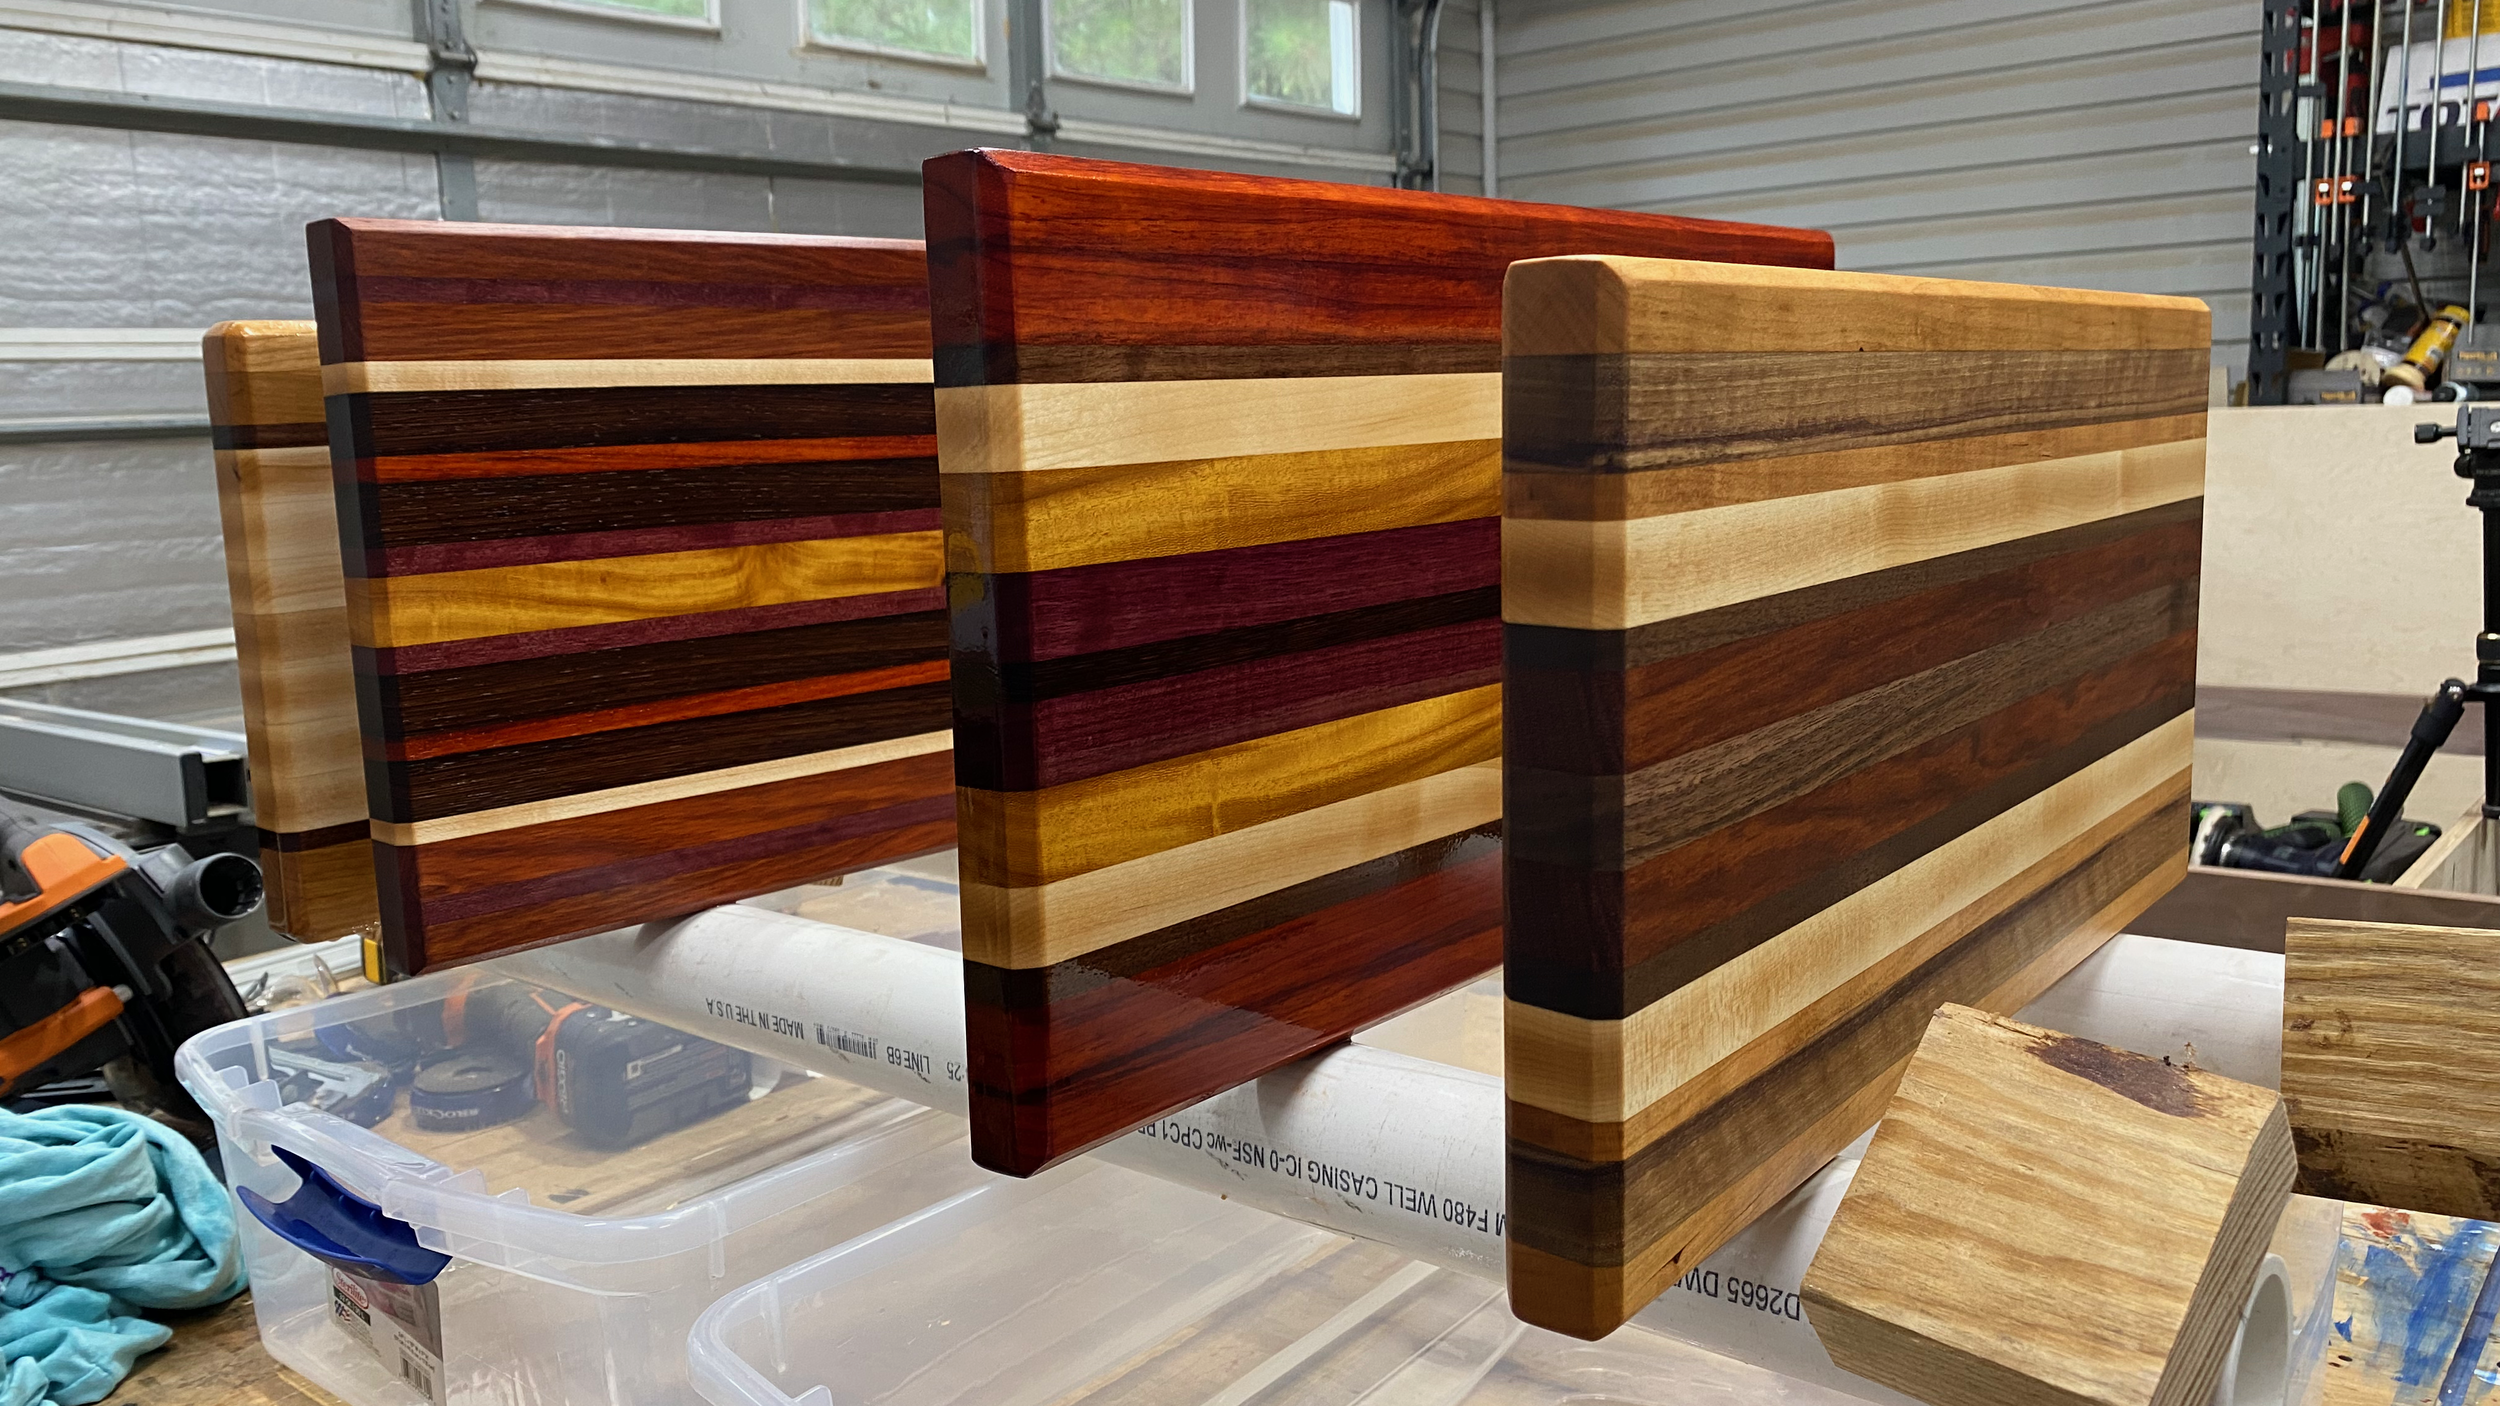 https://images.squarespace-cdn.com/content/v1/5a50cdd3b078698212f6e6af/1627221651862-SK5OEIQWDMOW6ZYKLSH7/cutting+board+drying+rack.png